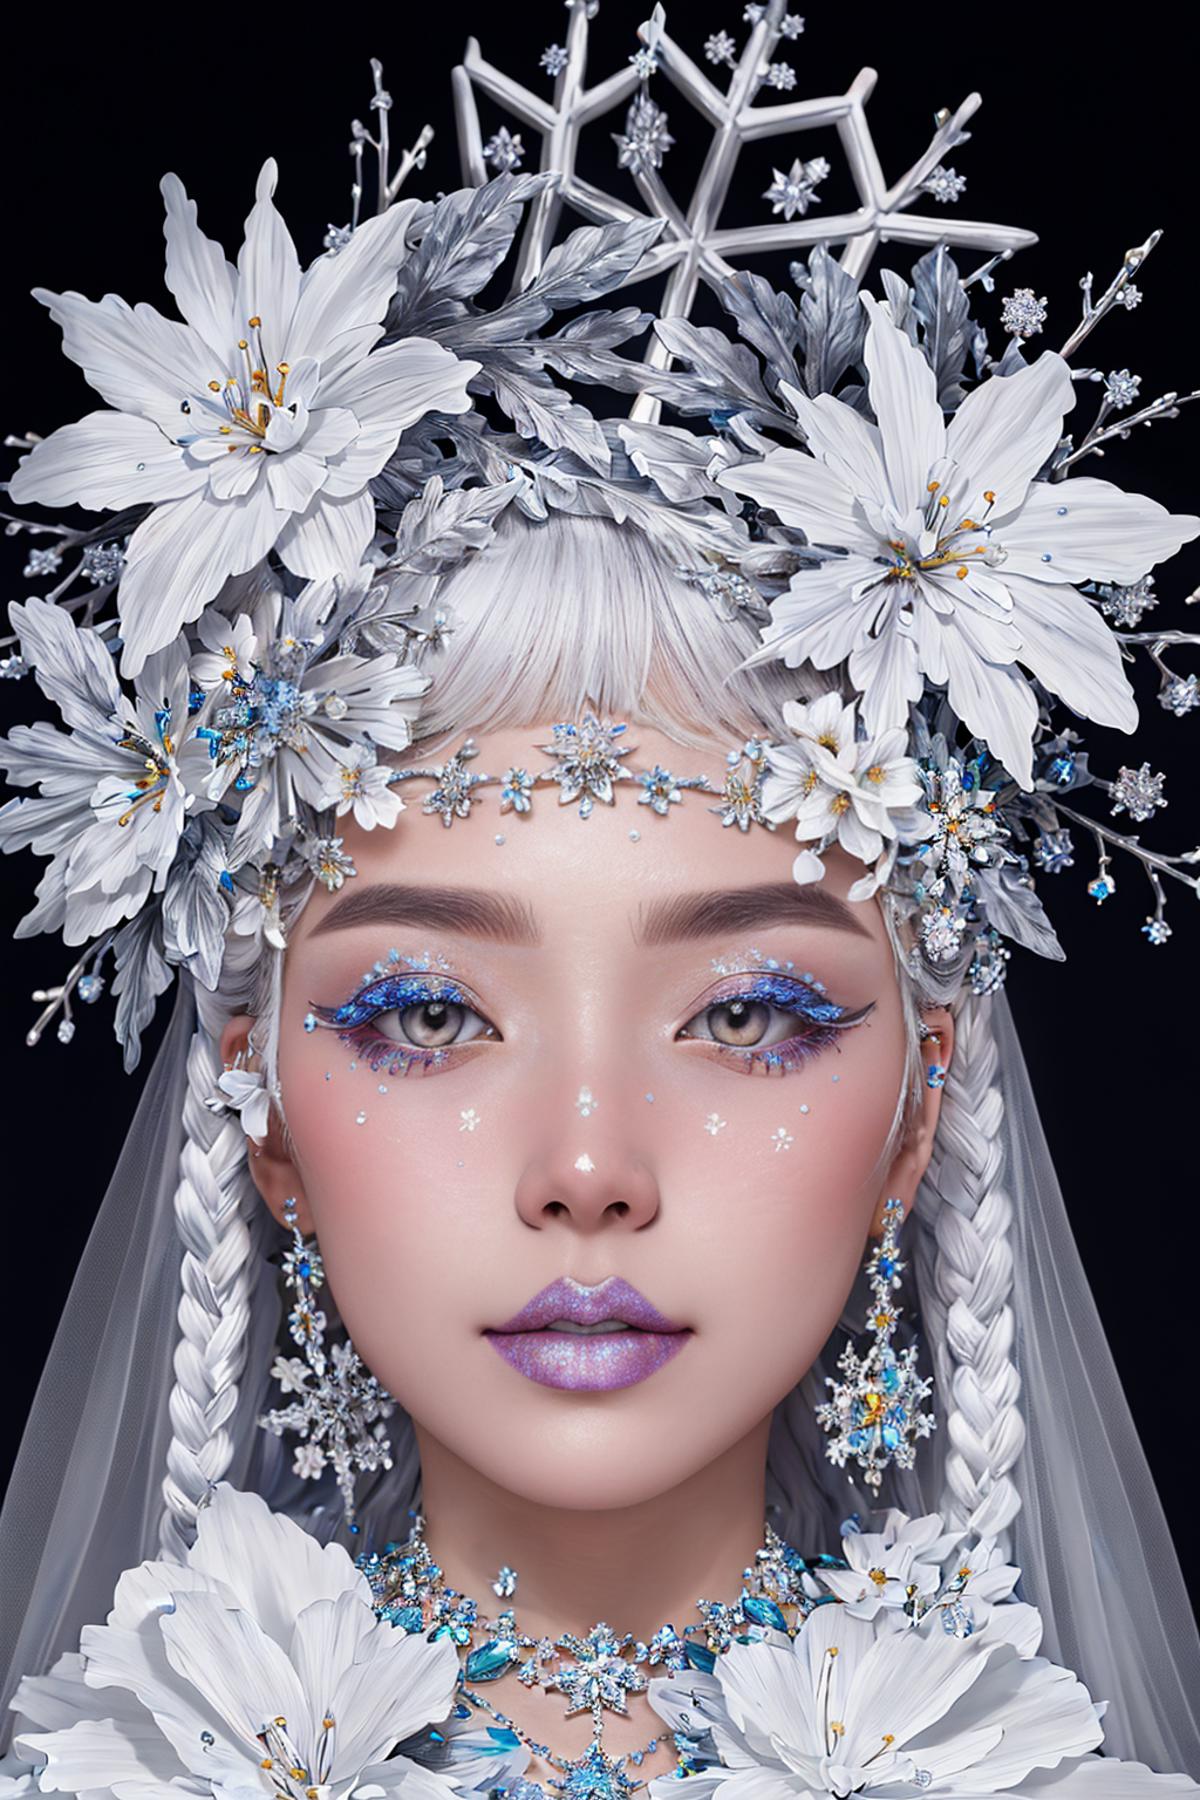 TQ - More Beautiful Detailed | Style LoRA image by TracQuoc